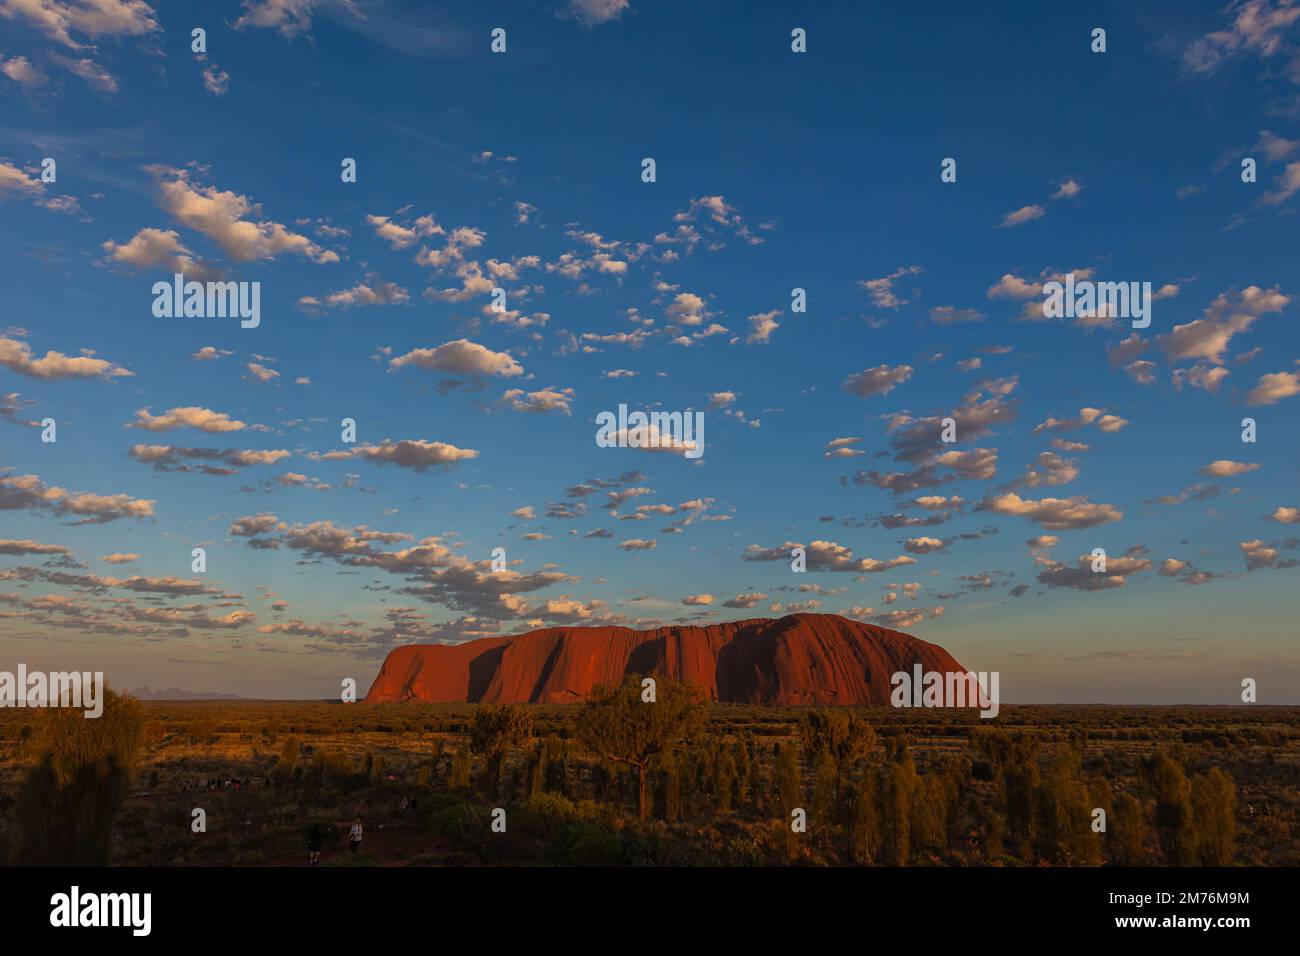 Outback, Australia - November 12, 2022: Sunrise at the Majestic Uluru or Ayers Rock at in the Northern Territory, Australia. The red rock in the cente Stock Photo